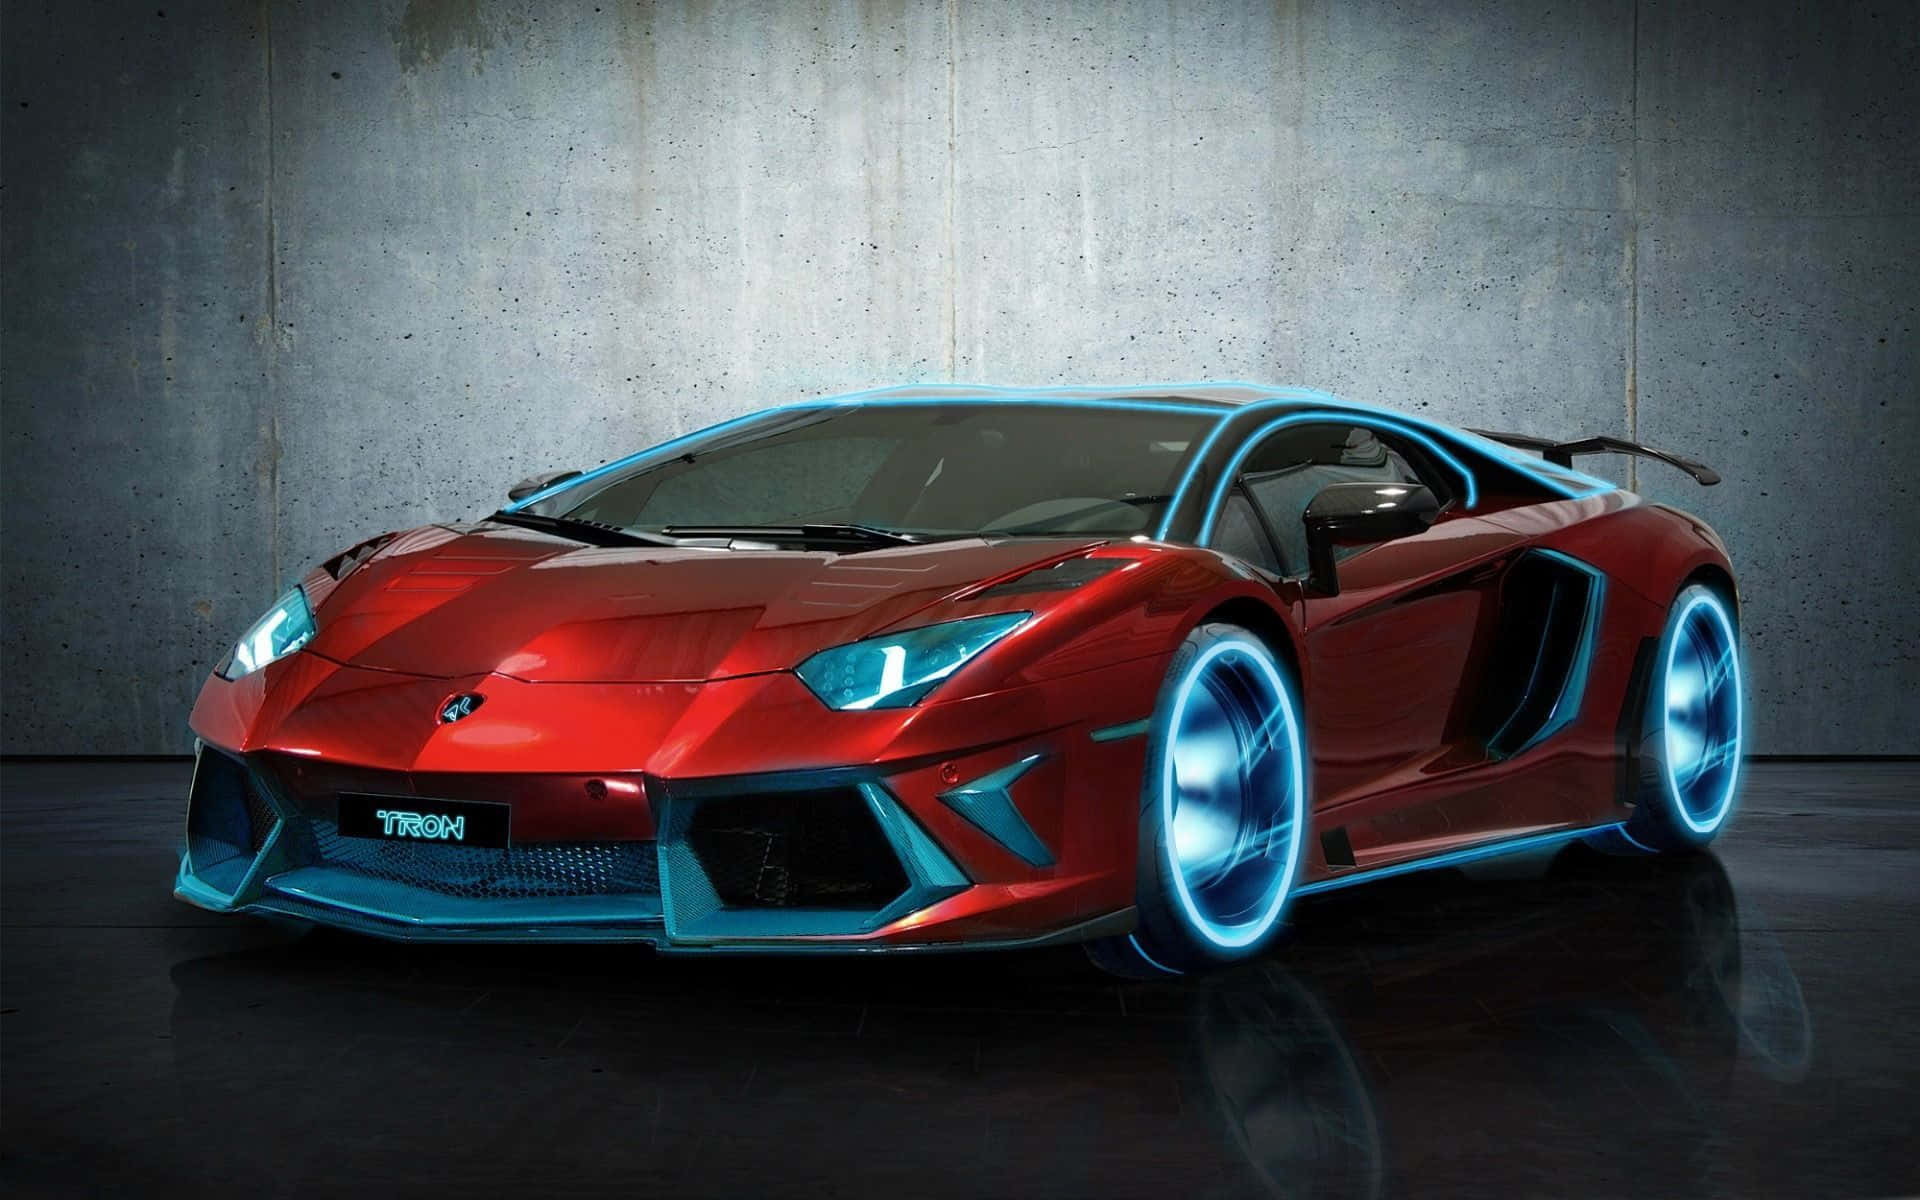 Cool Red Lamborghini Car With Neon Wheels Picture